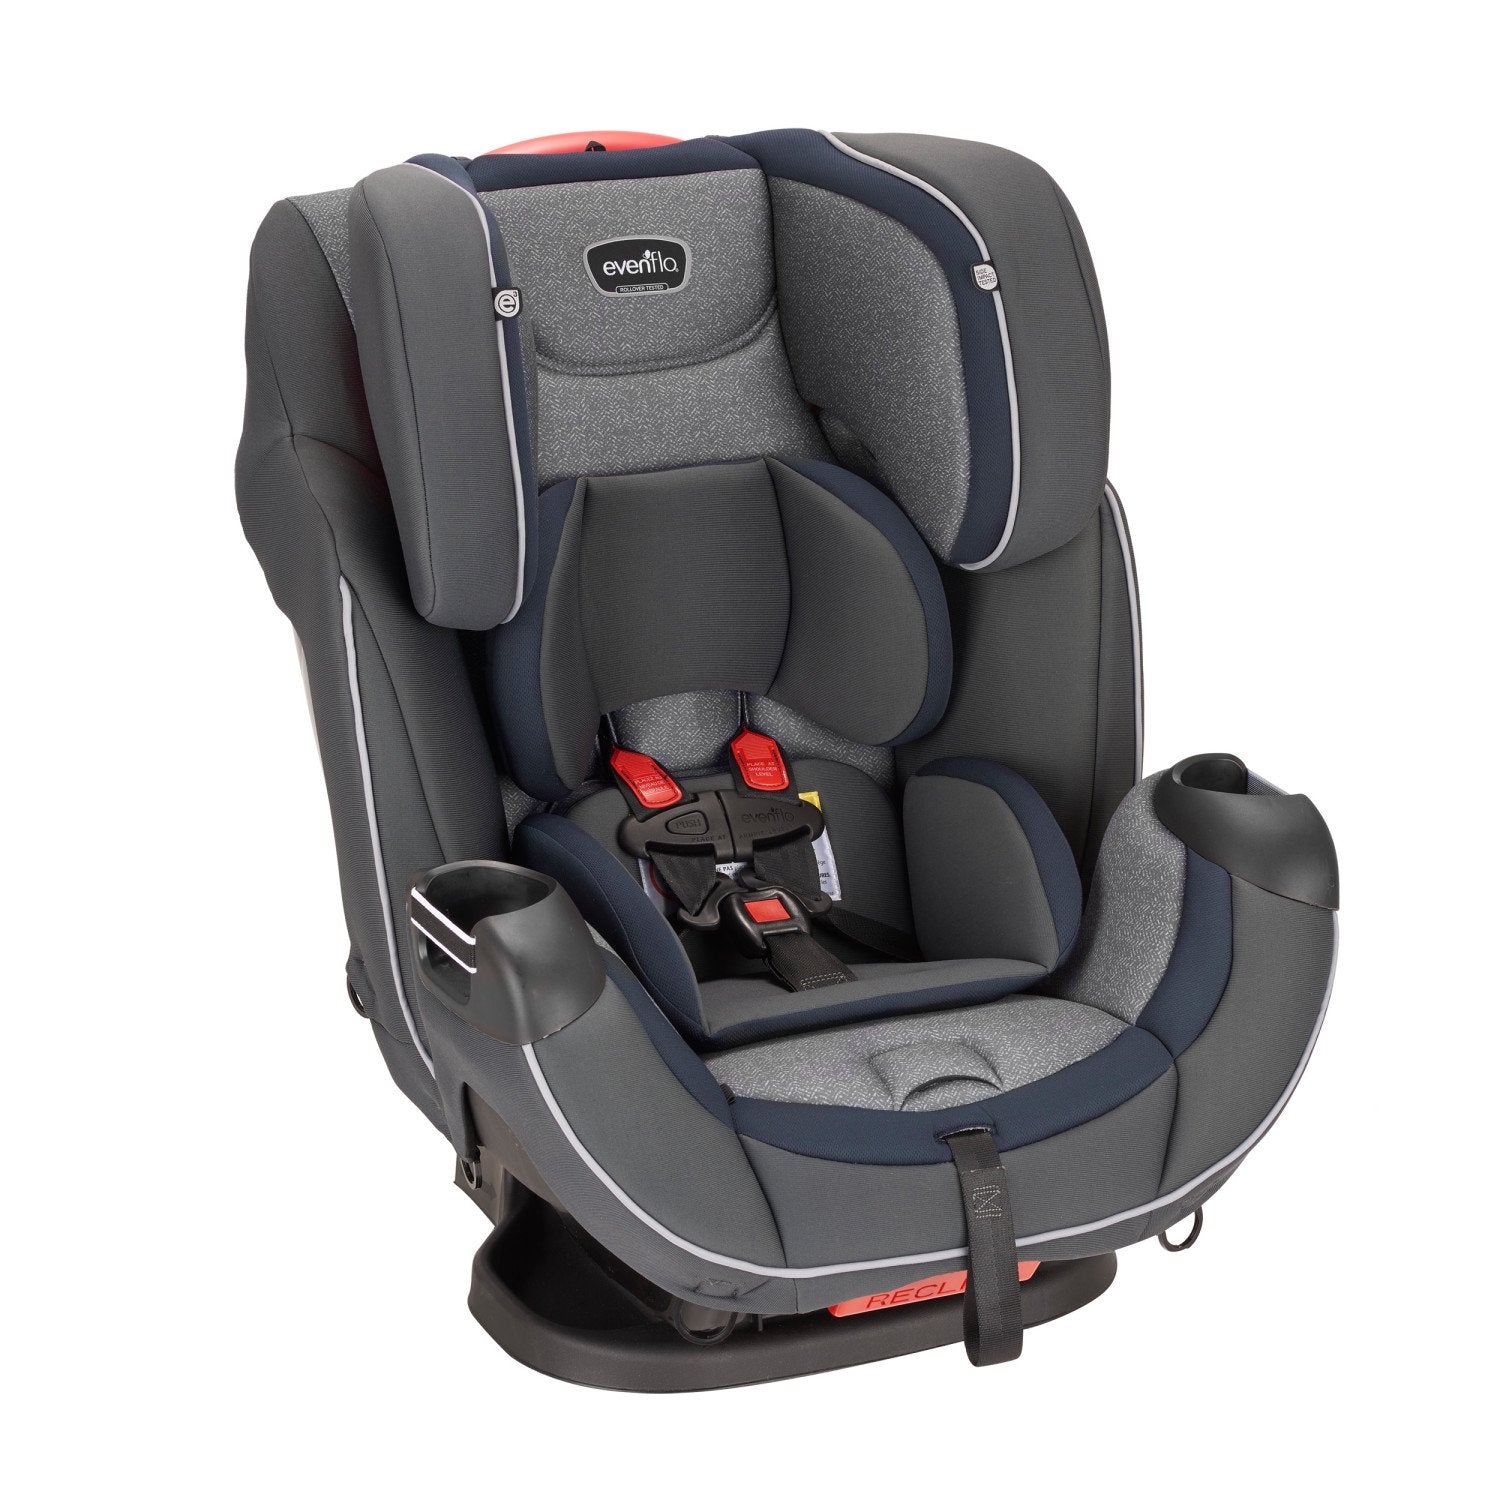 Evenflo Symphony DLX All-in-One Car Seat, Pinnacle Gray